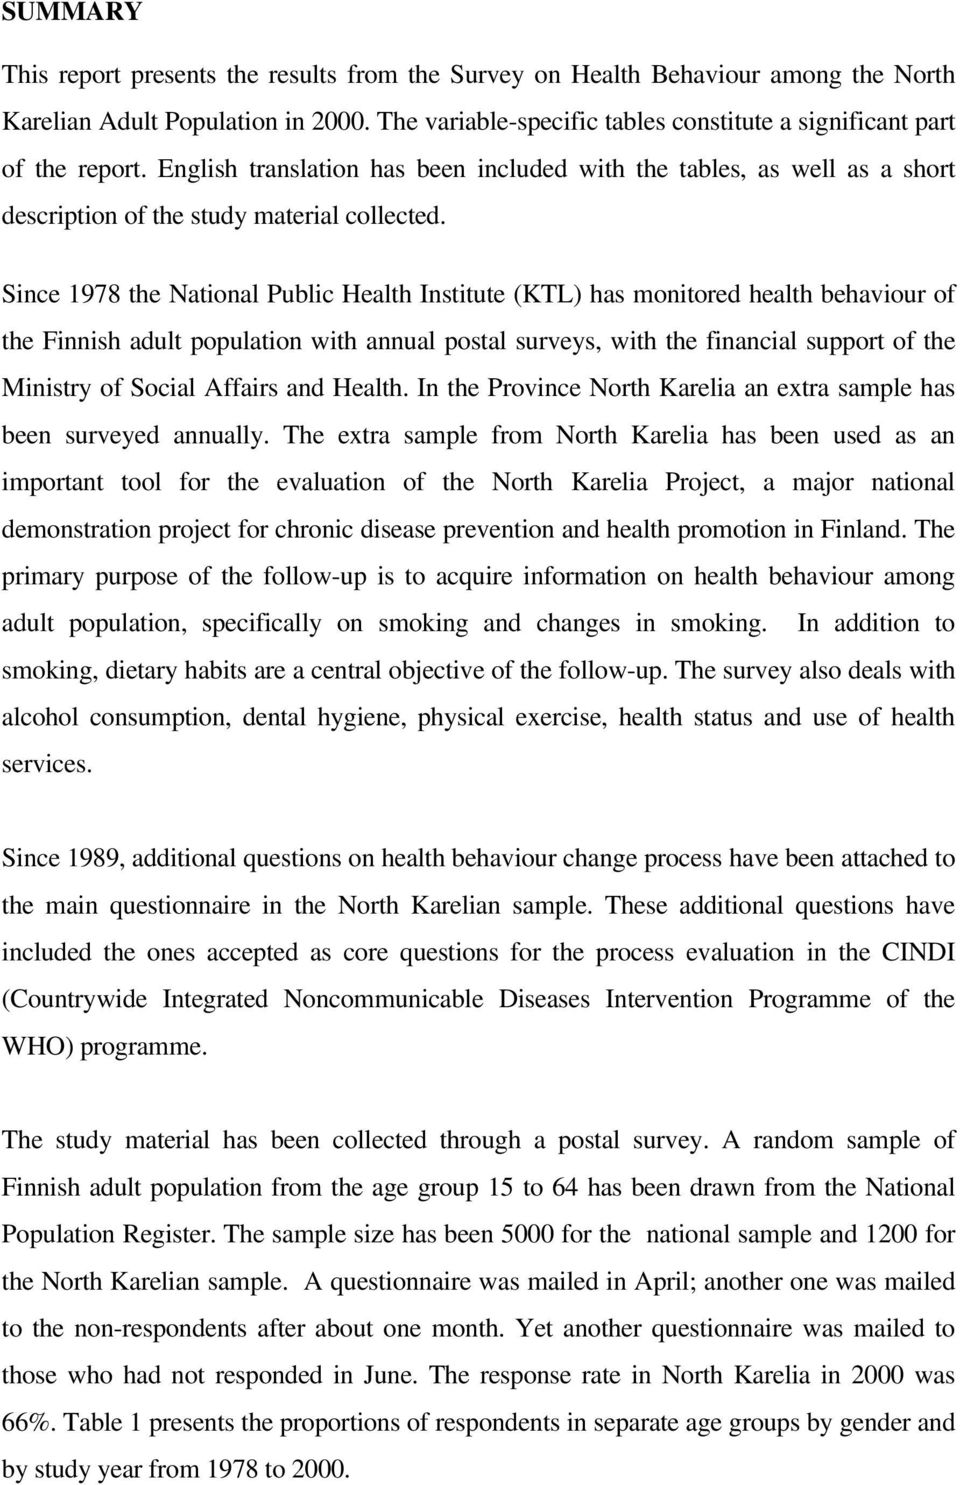 Since 1978 the National Public Health Institute (KTL) has monitored health behaviour of the Finnish adult population with annual postal surveys, with the financial support of the Ministry of Social